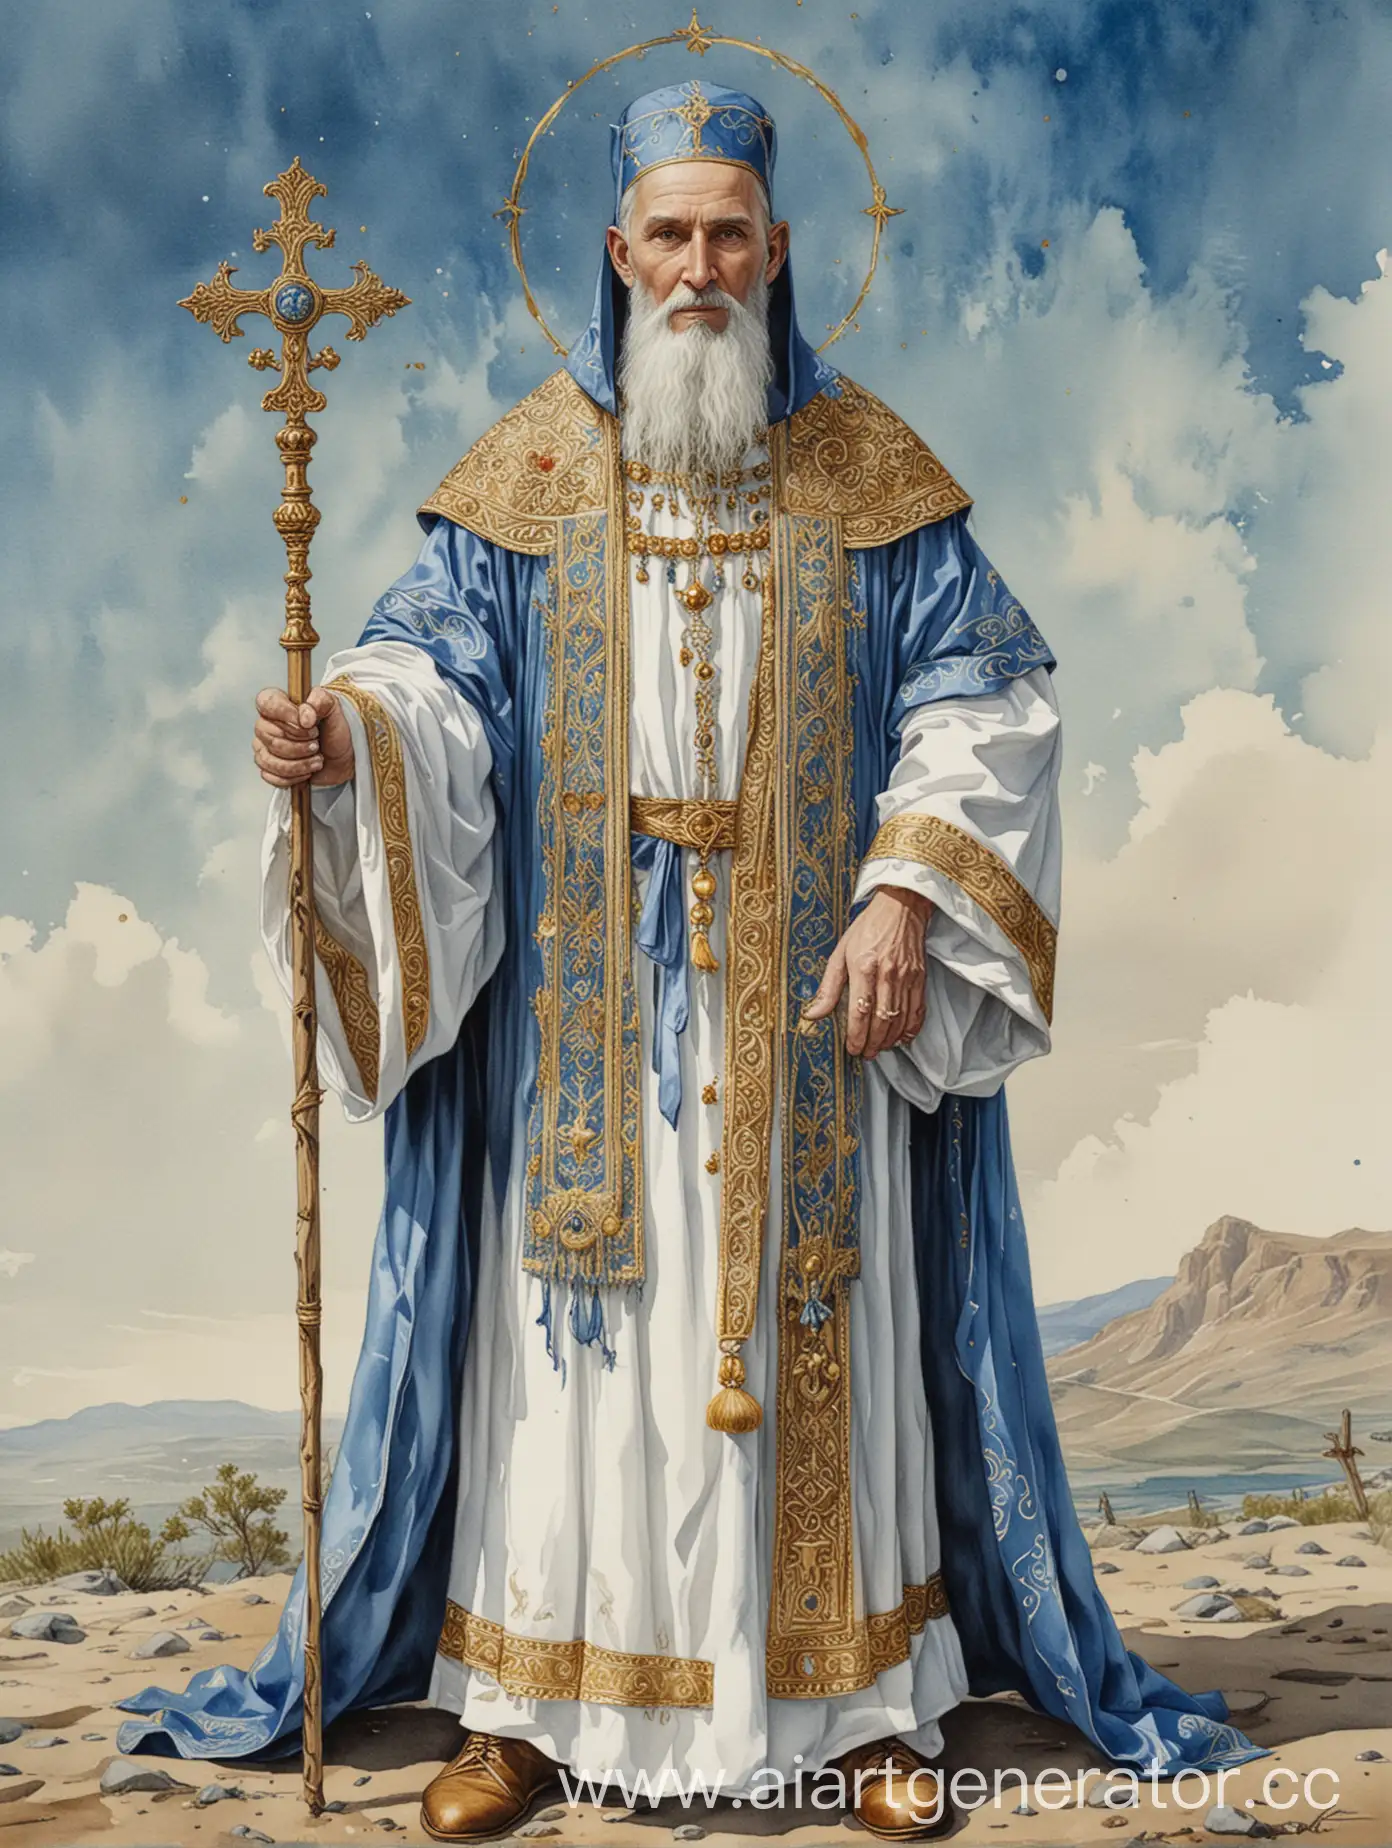 The-High-Priest-Tarot-Card-Wise-Spiritual-Leader-Blessing-with-Orthodox-Cross-Staff